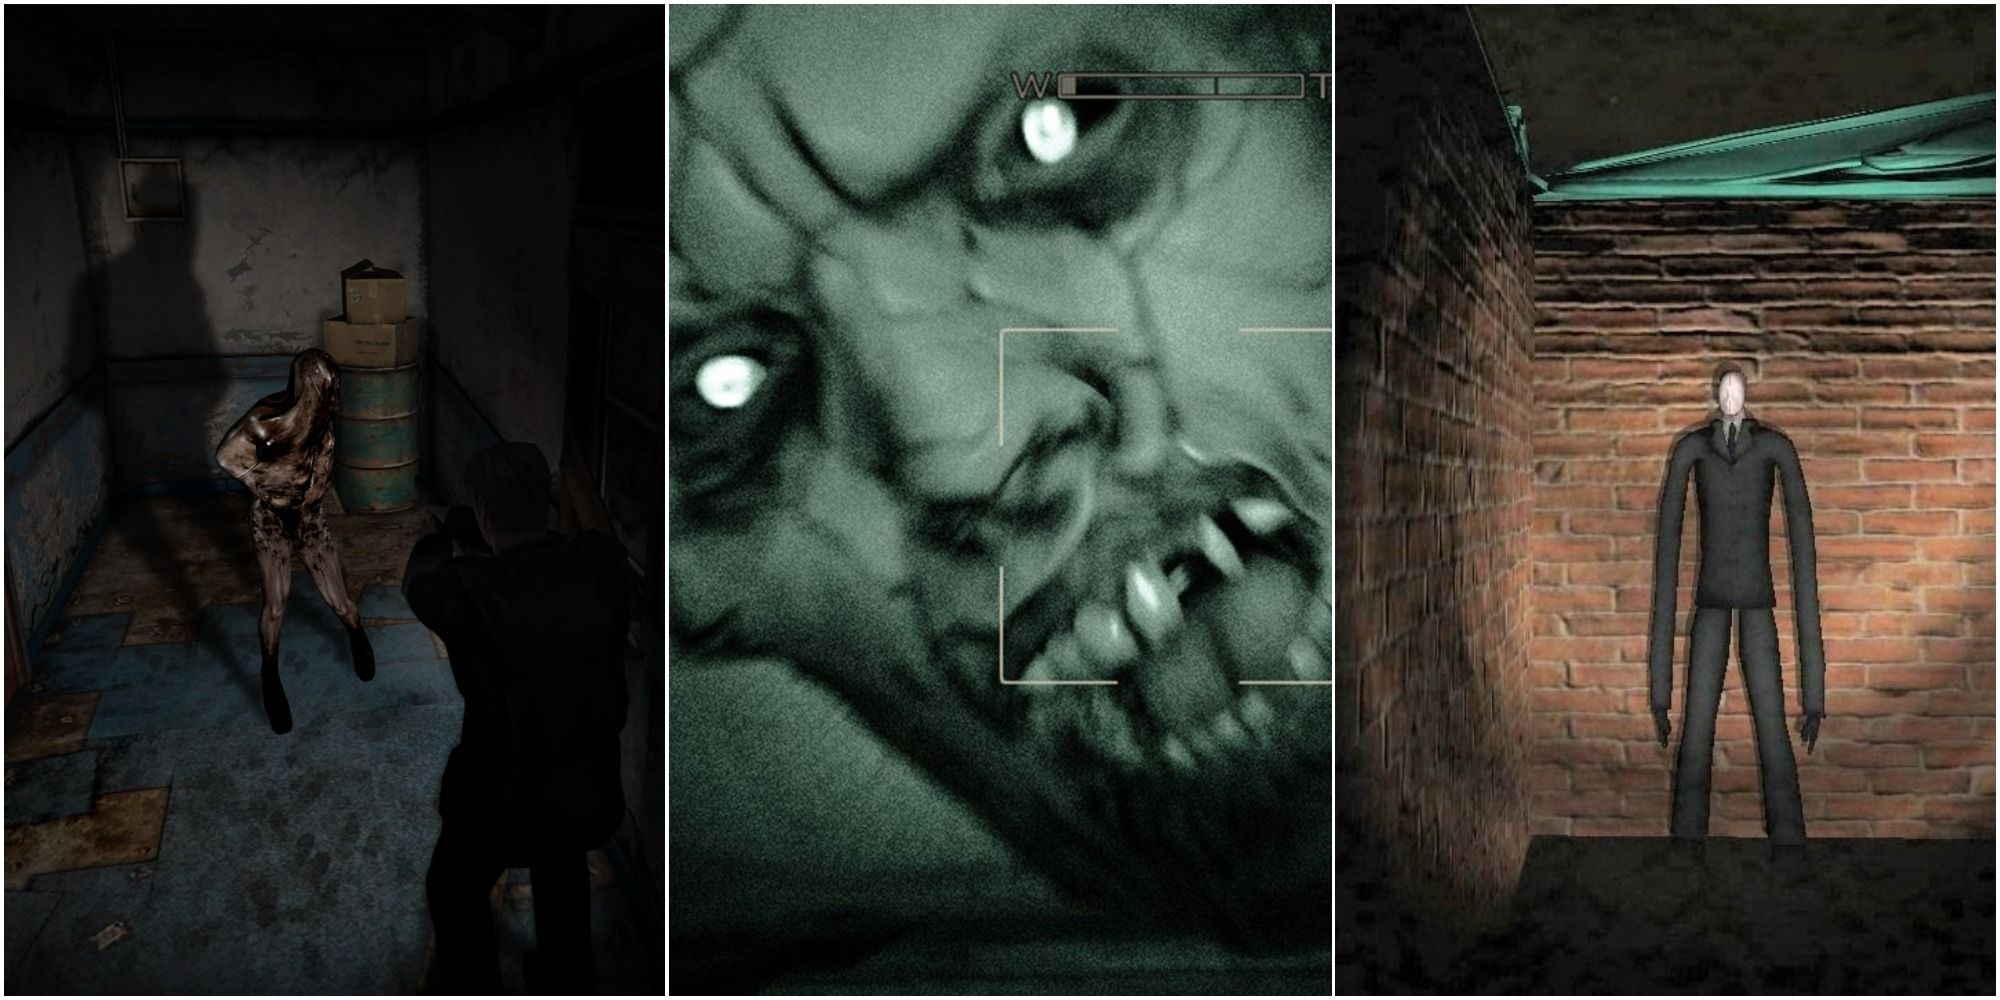 Silent Hill 2, Outlast, and Slender: The Eight Pages in a Split Feature Image For Scariest Flashlight-Wielding Games Article